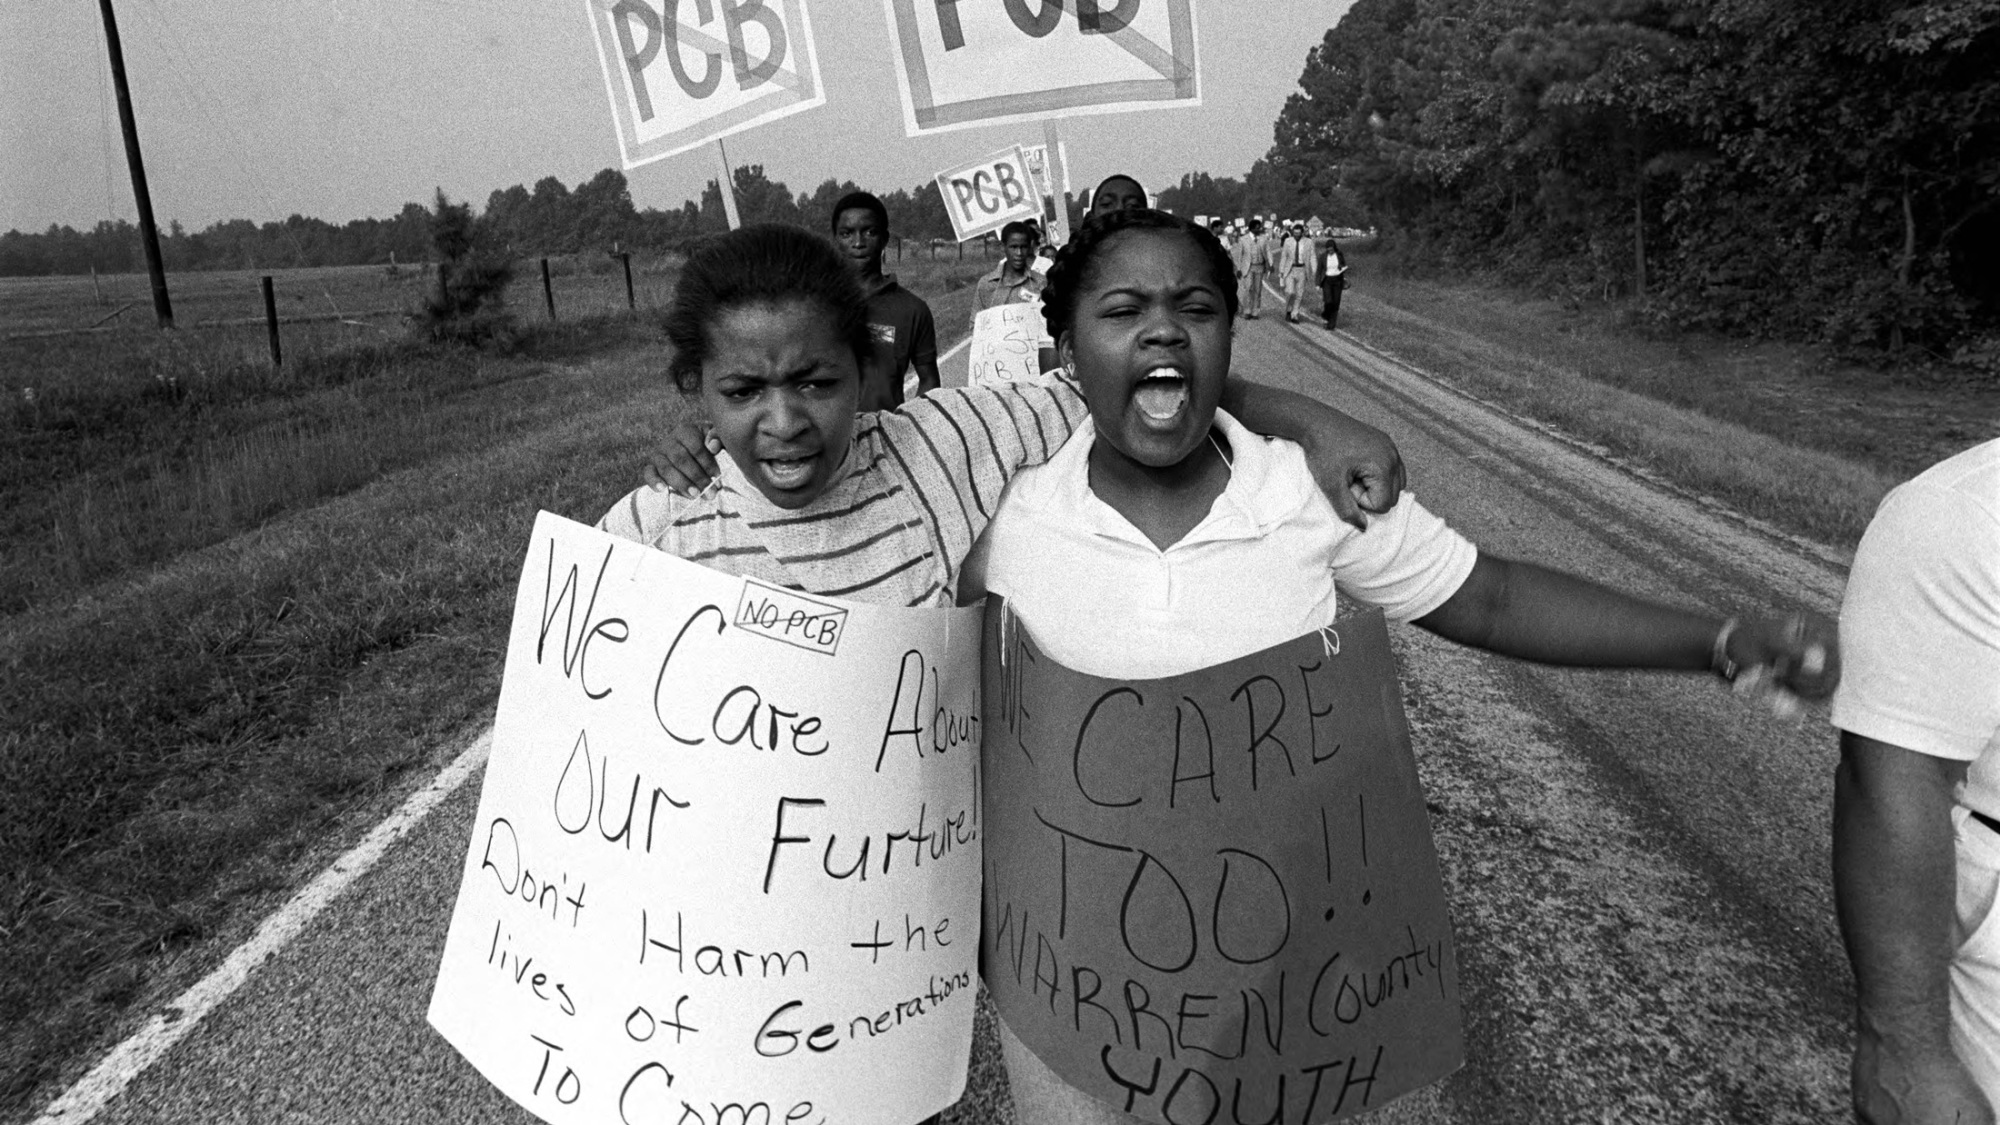 Two Black youth with arms around each other participate in a protest in Warren County. They have signs that say, "We care about our future."